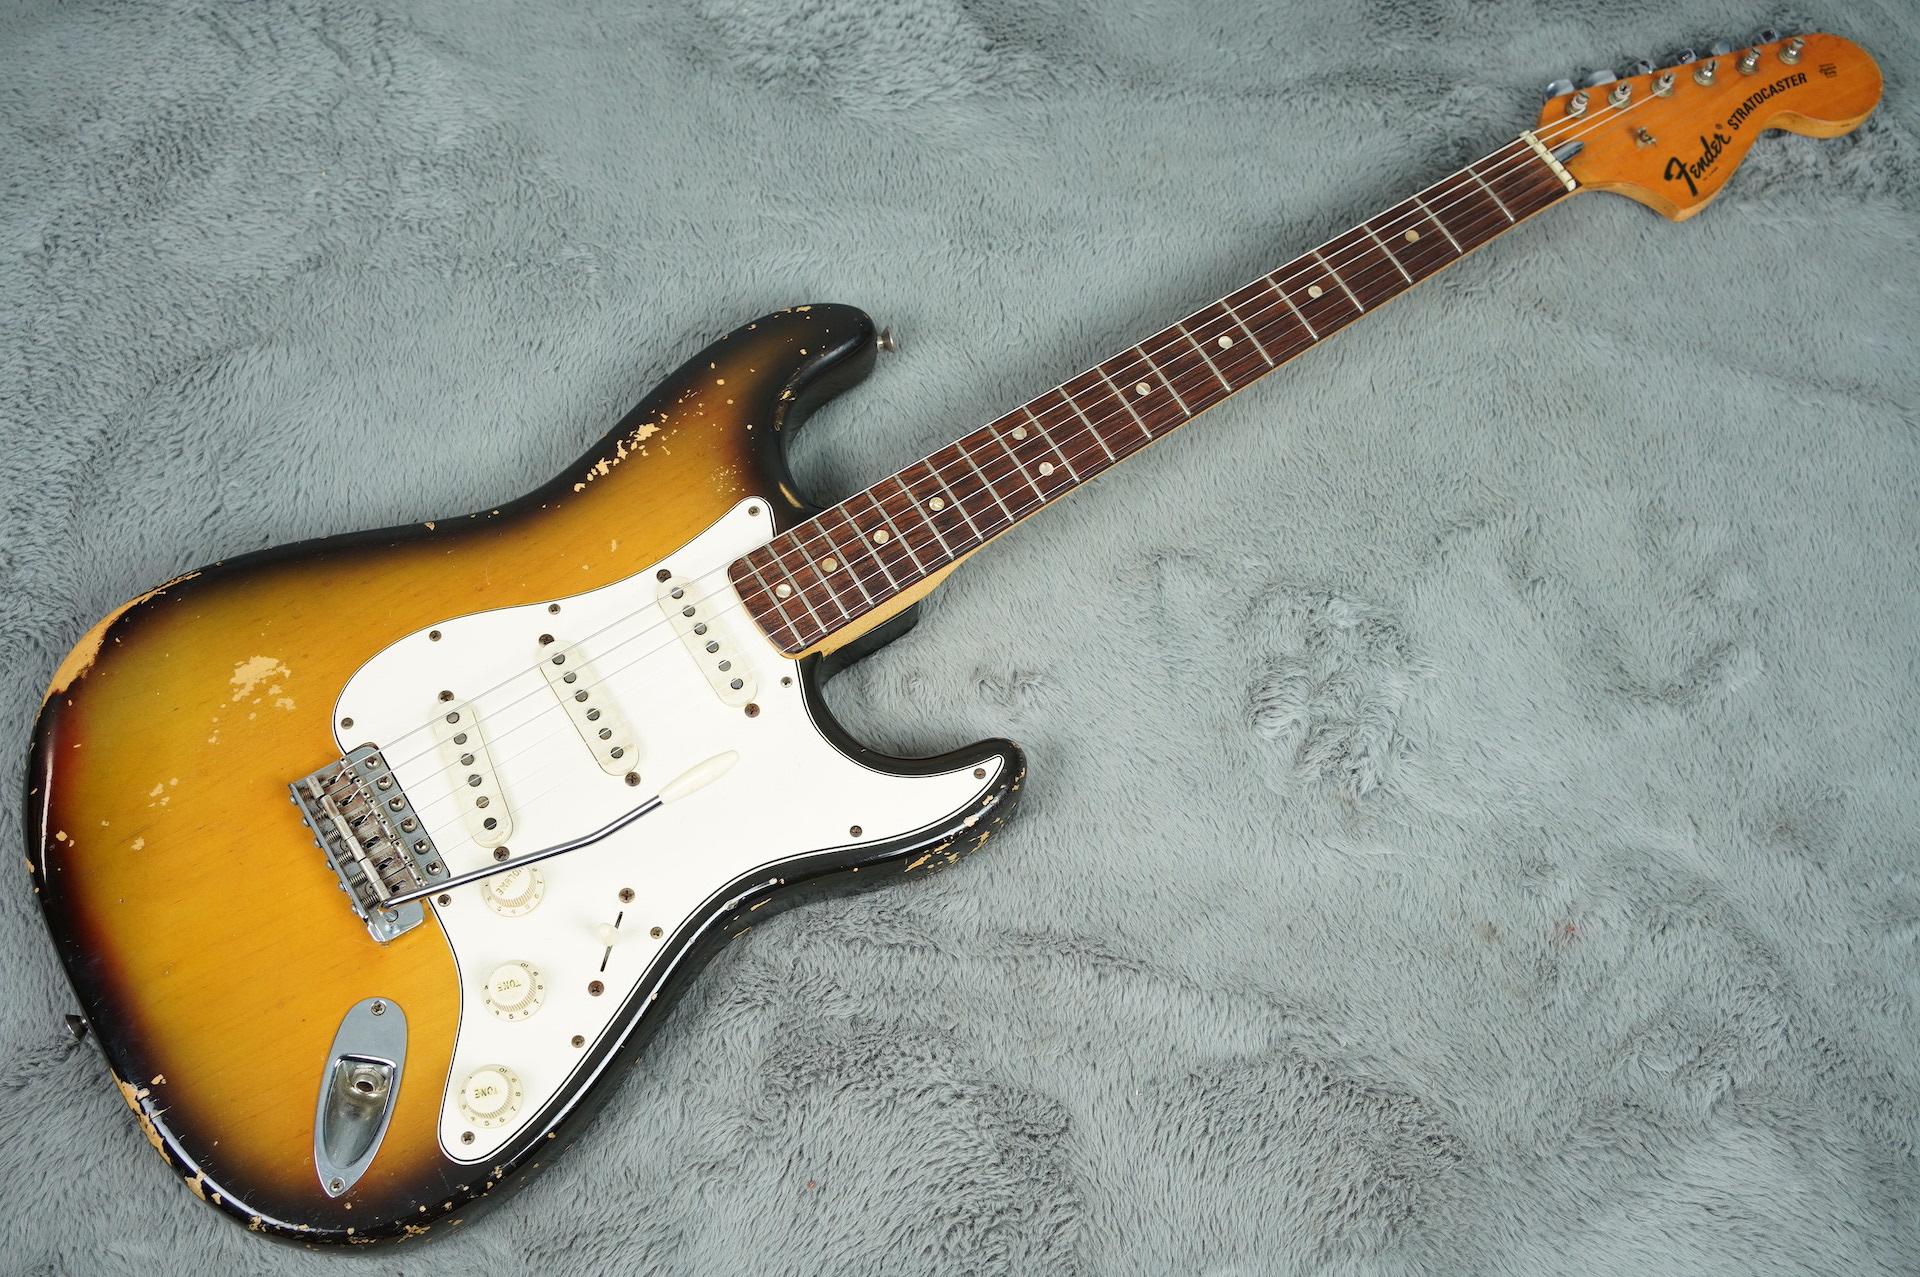 Will brush curb 1972 Fender Stratocaster + HSC